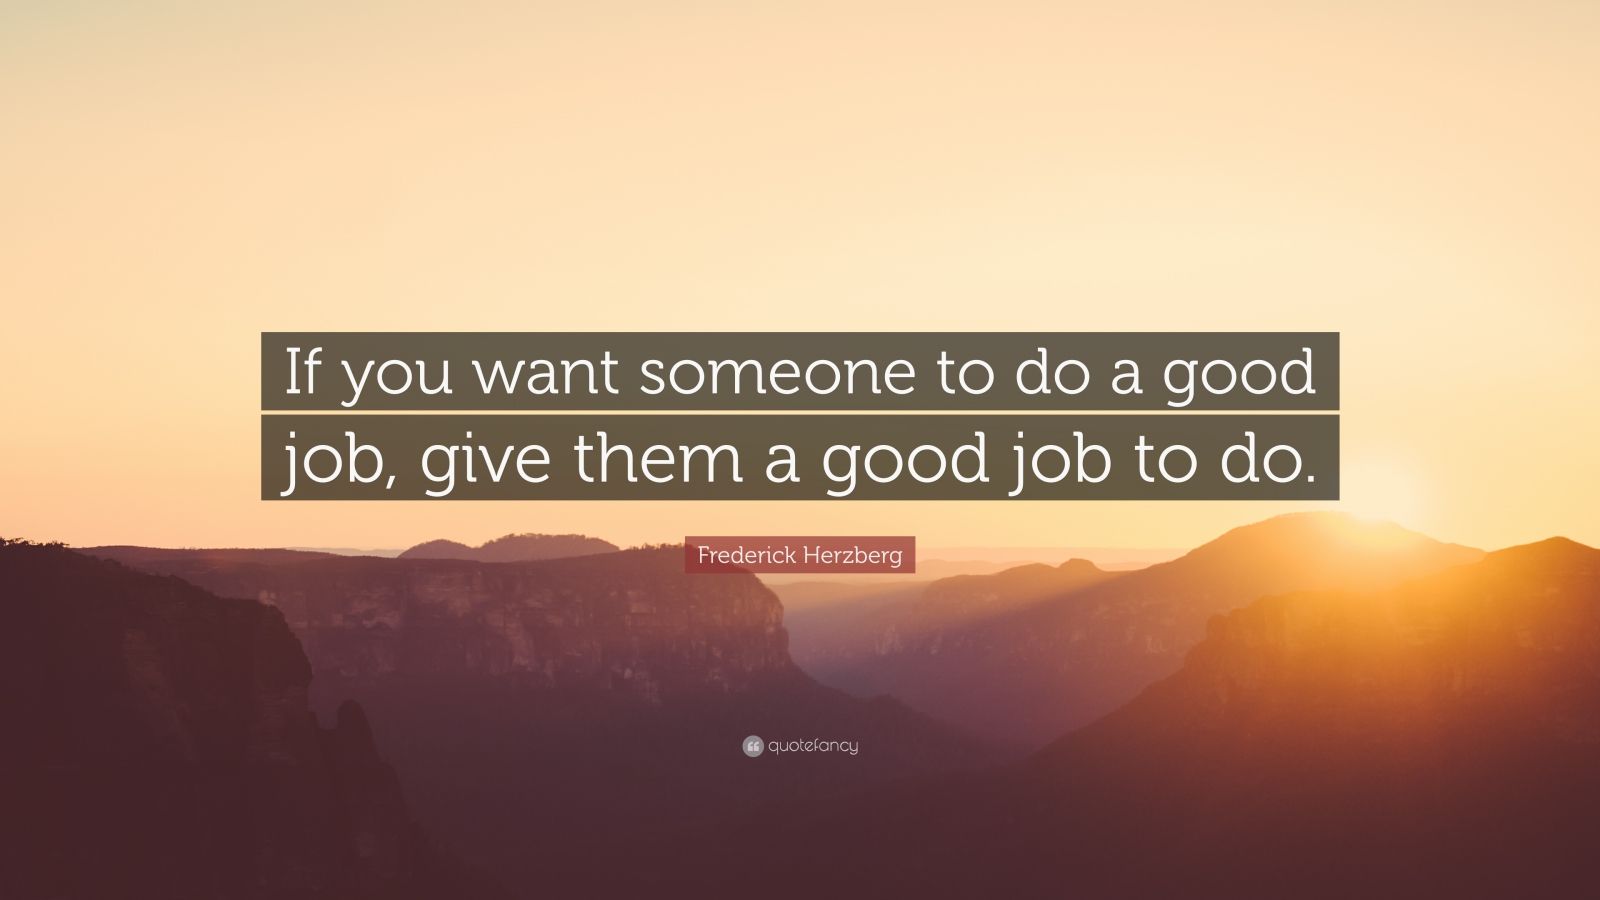 Frederick Herzberg Quote: “If you want someone to do a good job, give